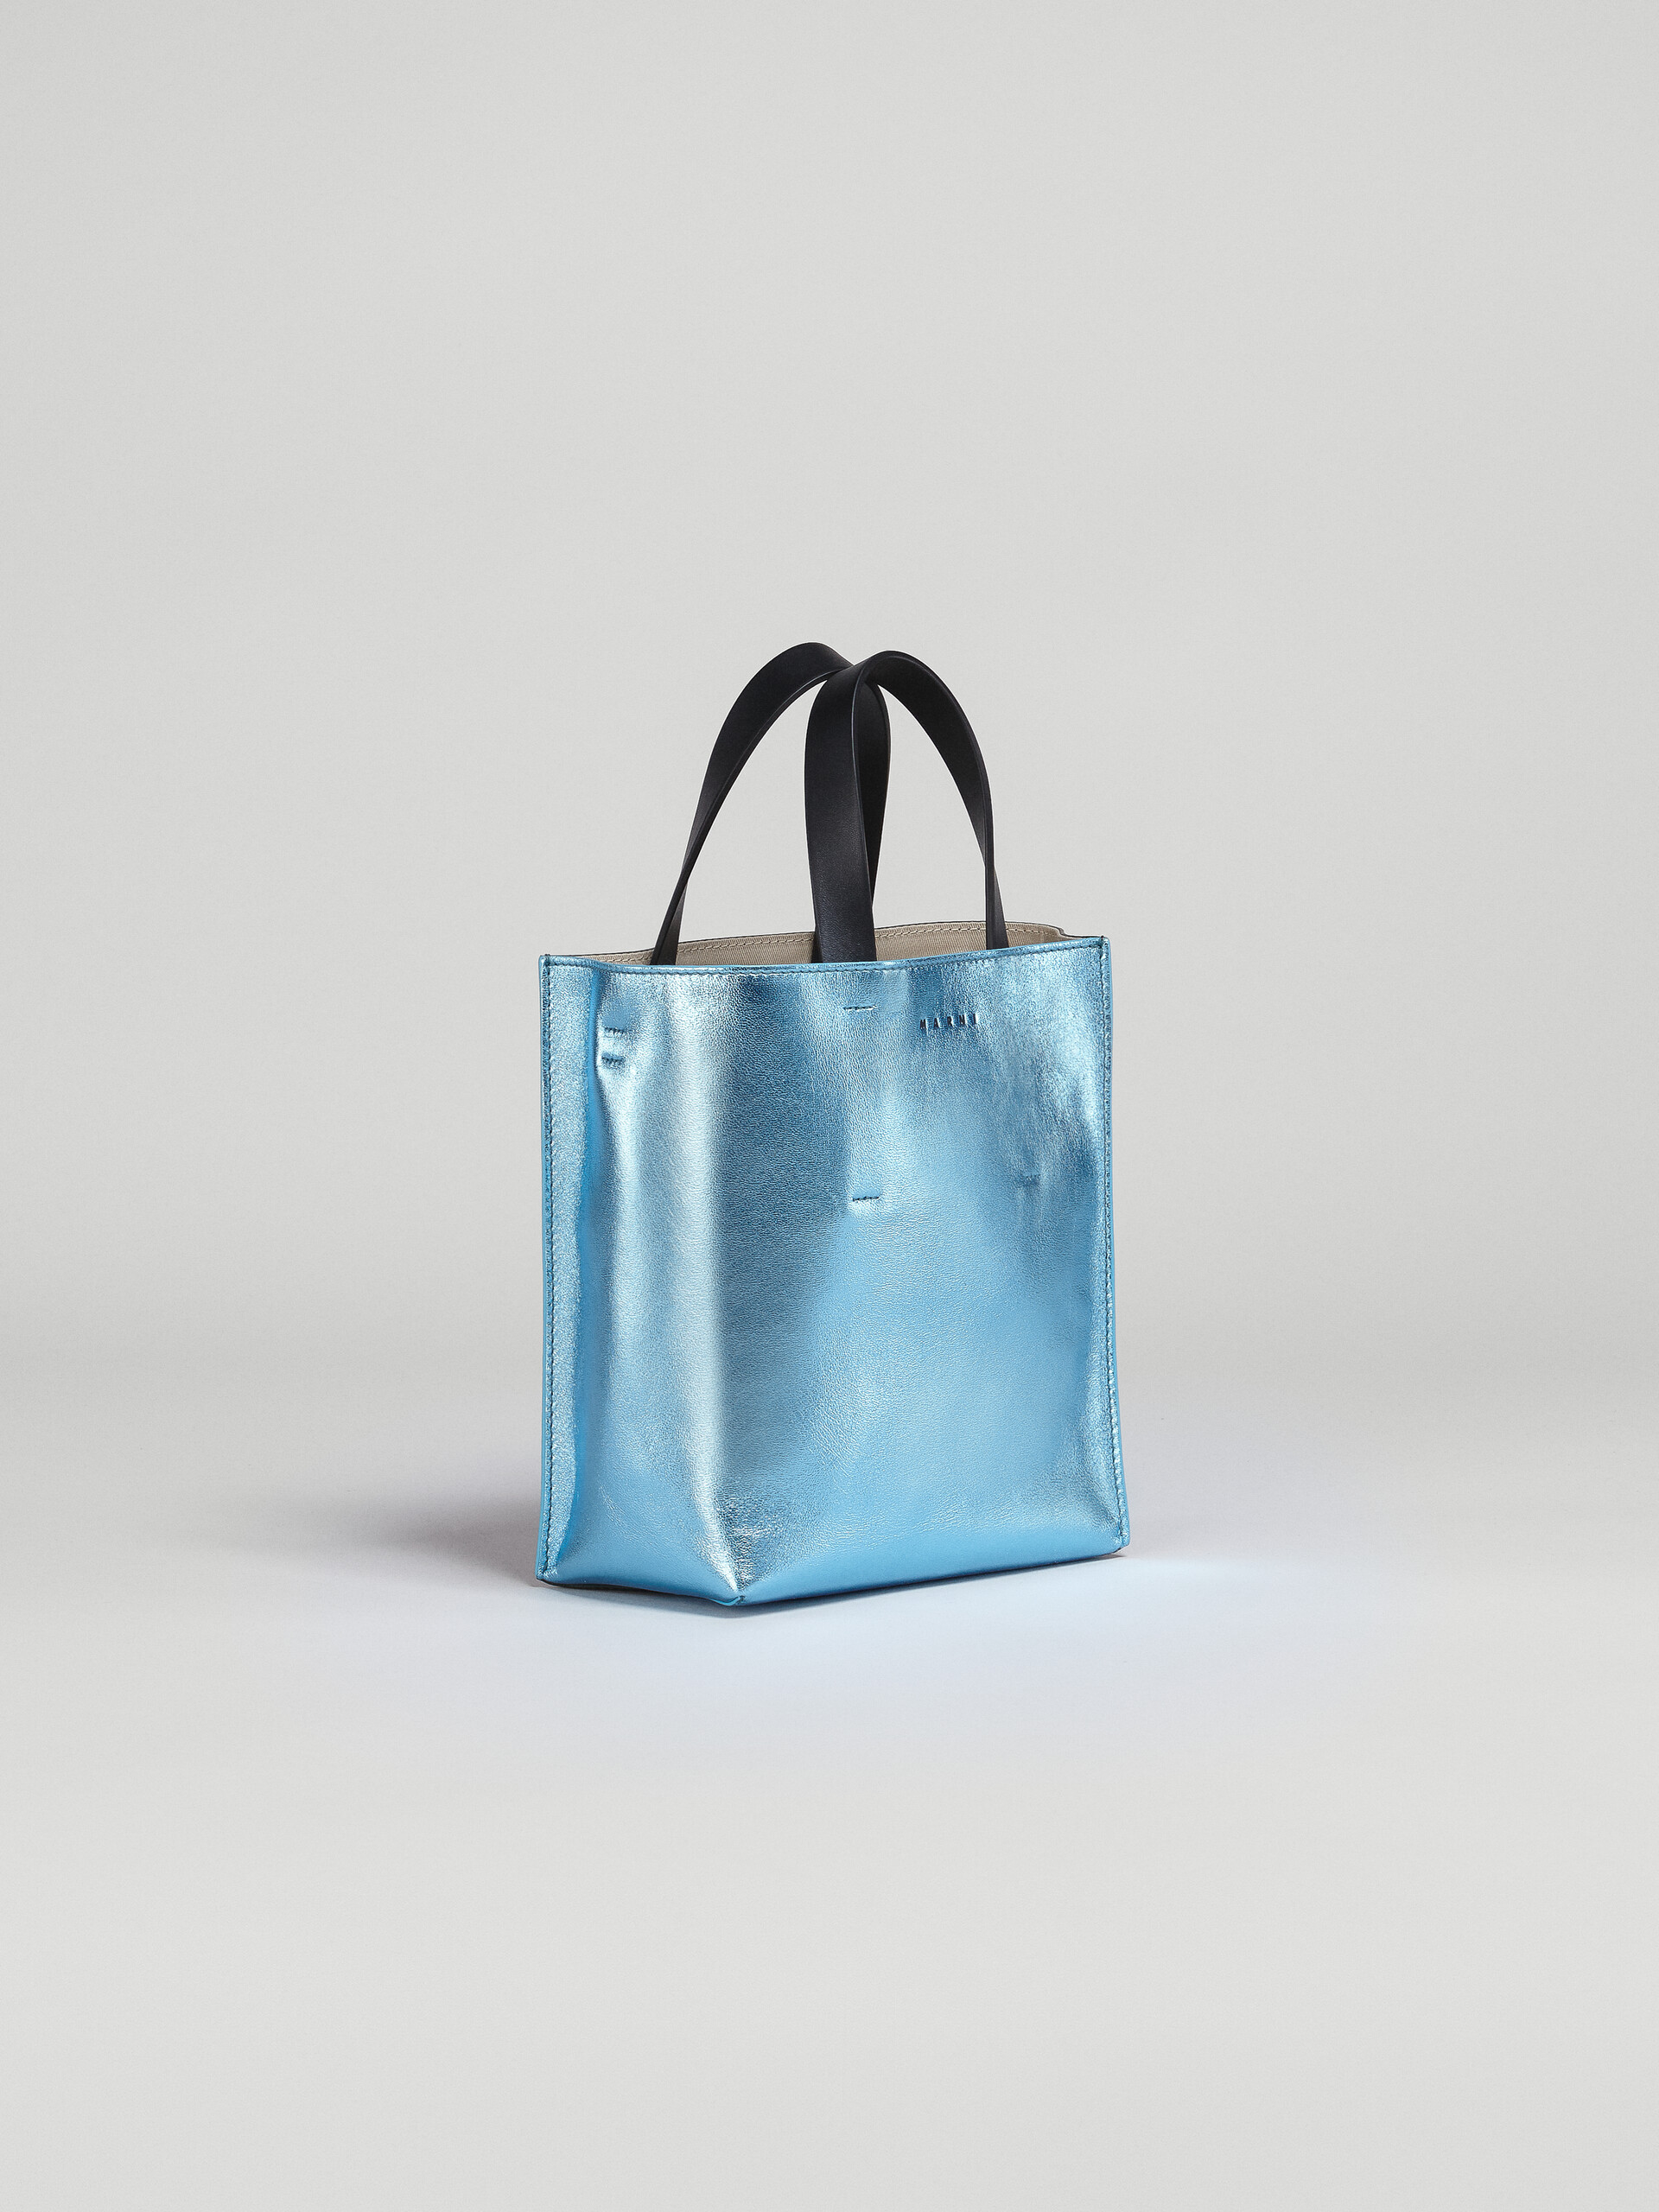 Pale blue green and black metallic leather MUSEO bag - Shopping Bags - Image 5